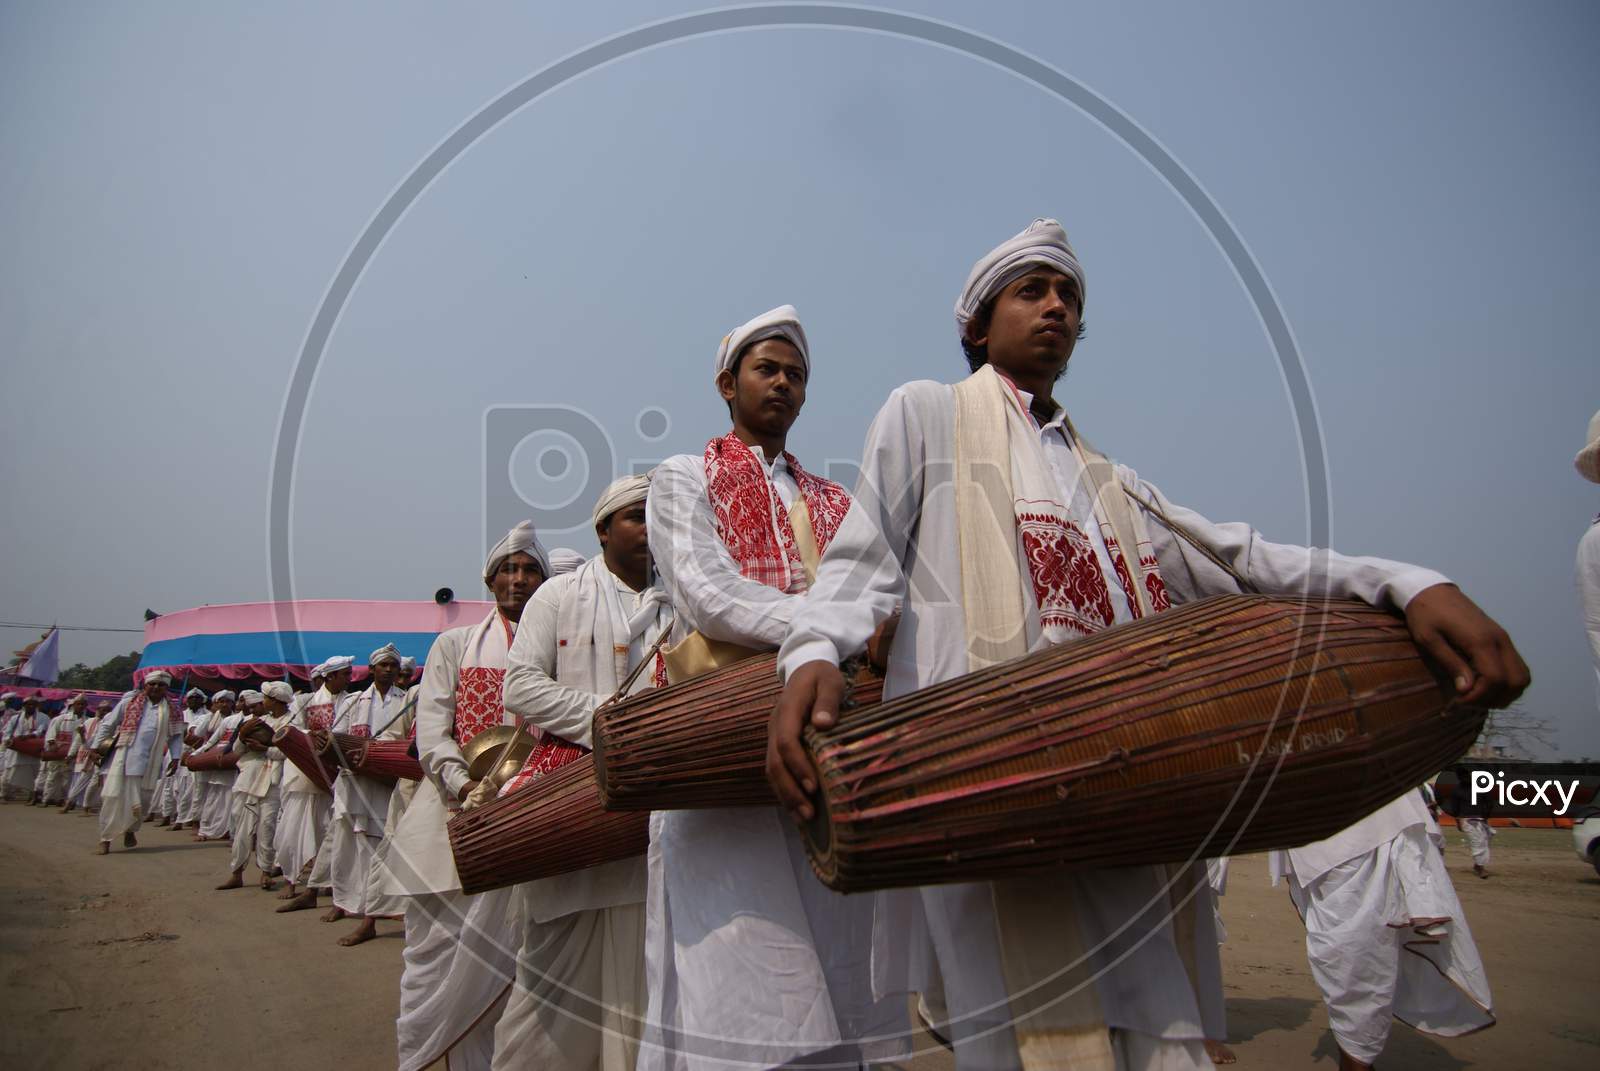 Assam People Dancing With Traditional Drums  in Festival Celebrations